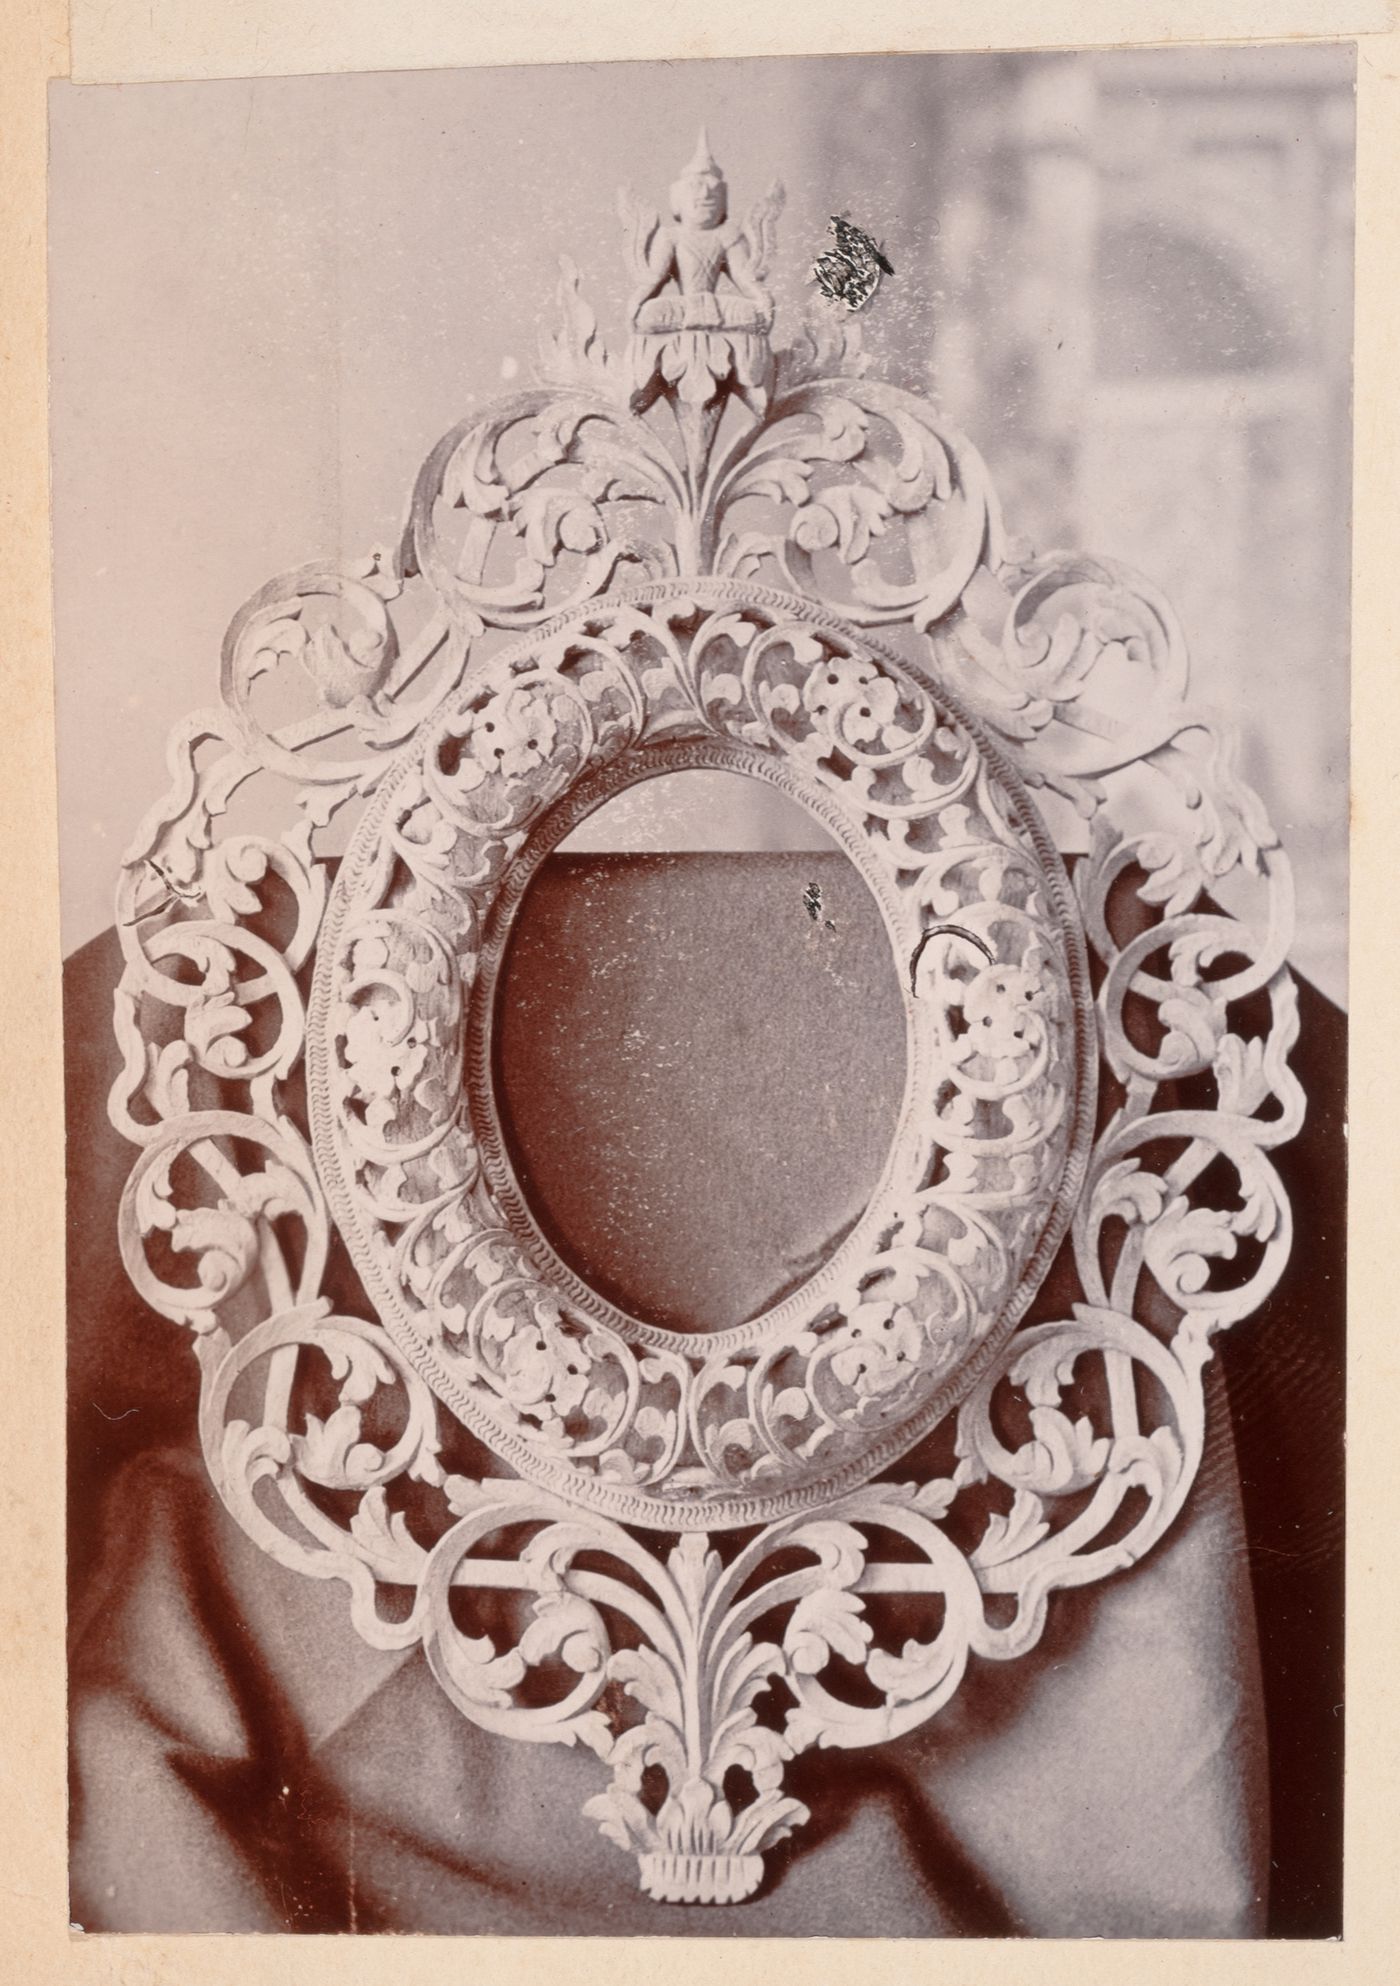 View of a frame, F. Beato Limited, C Road, Mandalay, Burma (now Myanmar)